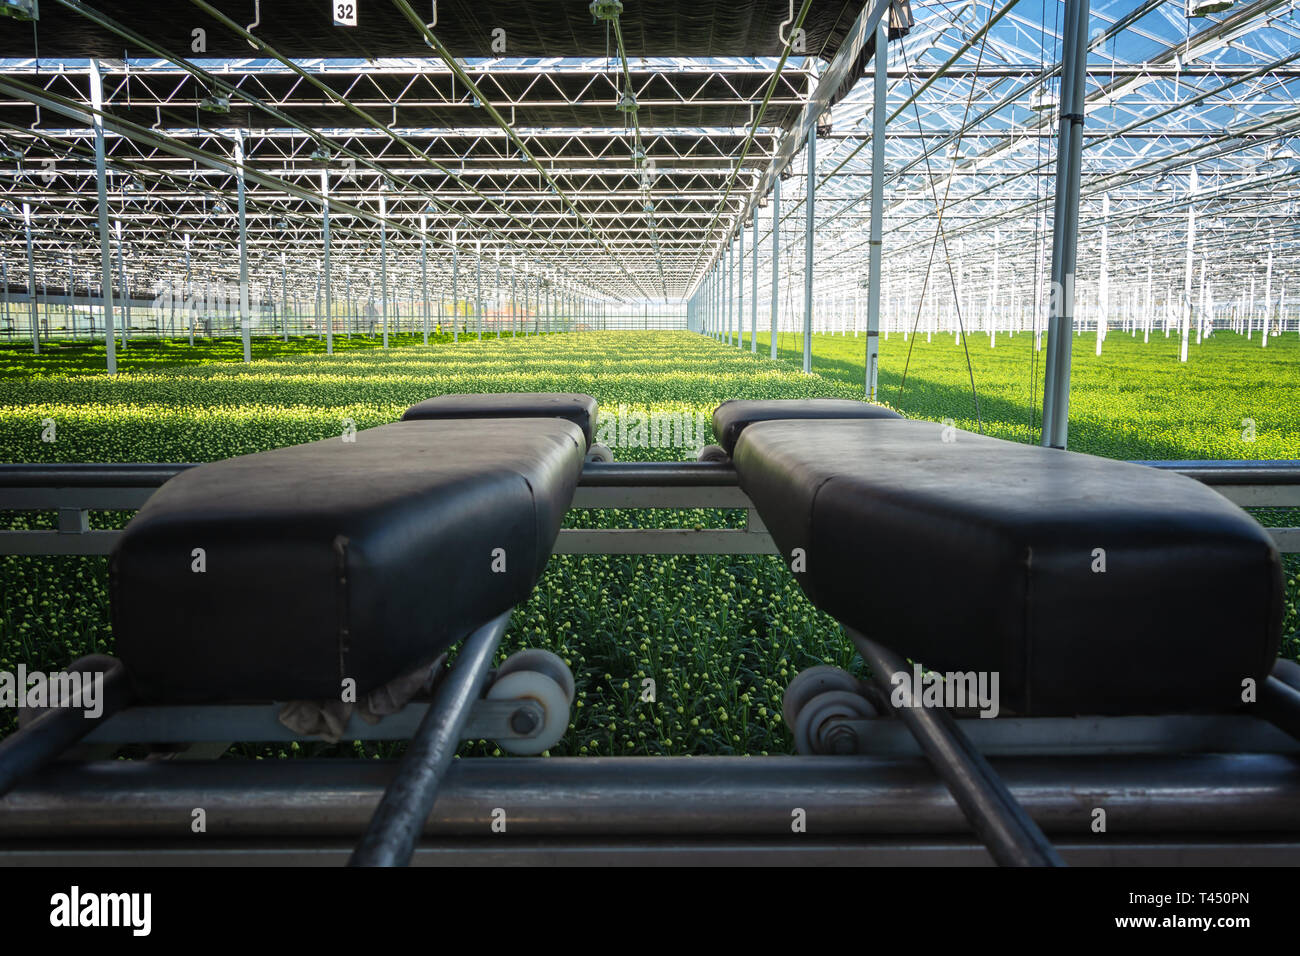 Two cushions that are used as santinis must be topped in a huge greenhouse in the Netherlands Stock Photo